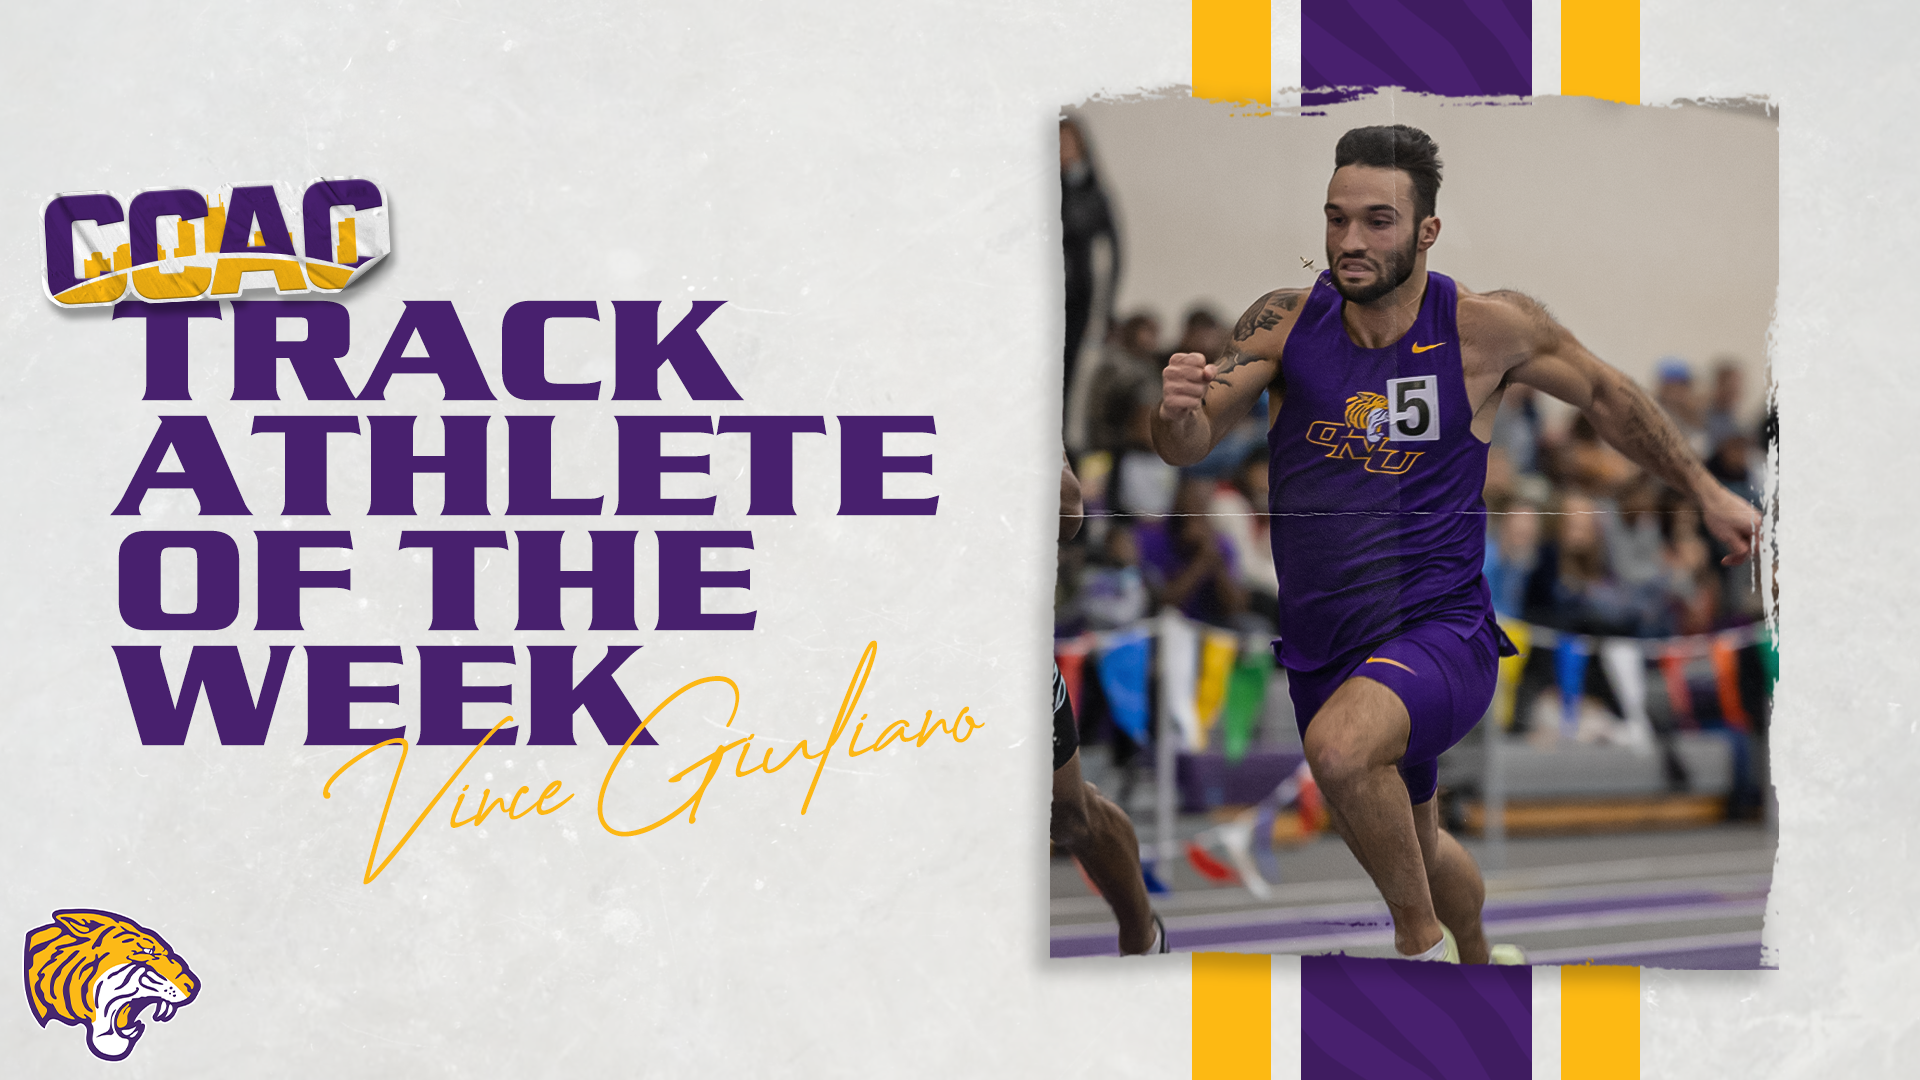 GIULIANO CLAIMS WEEKLY CCAC TRACK ATHLETE OF THE WEEK AWARD